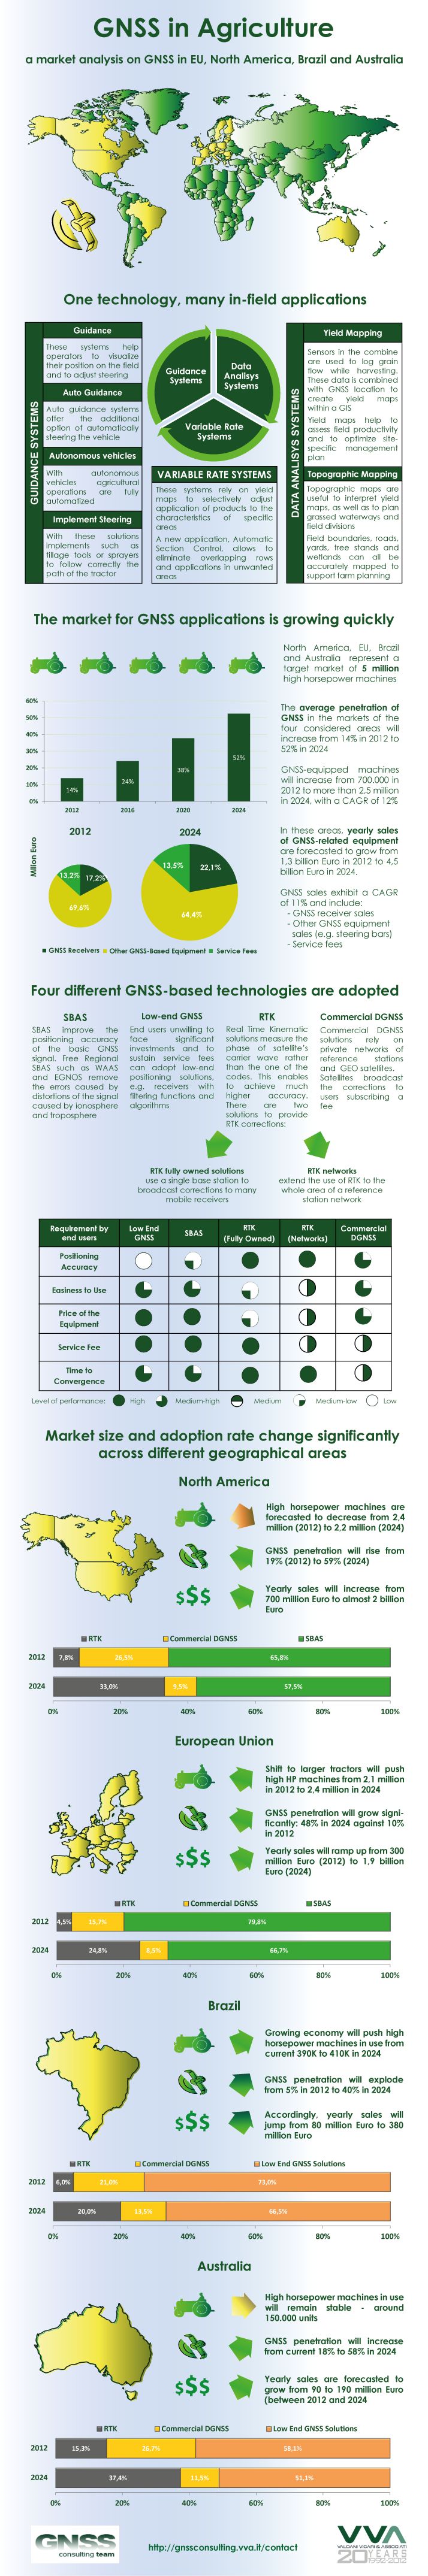 infographic about GNSS in agriculture market analysis, nov. 2012.